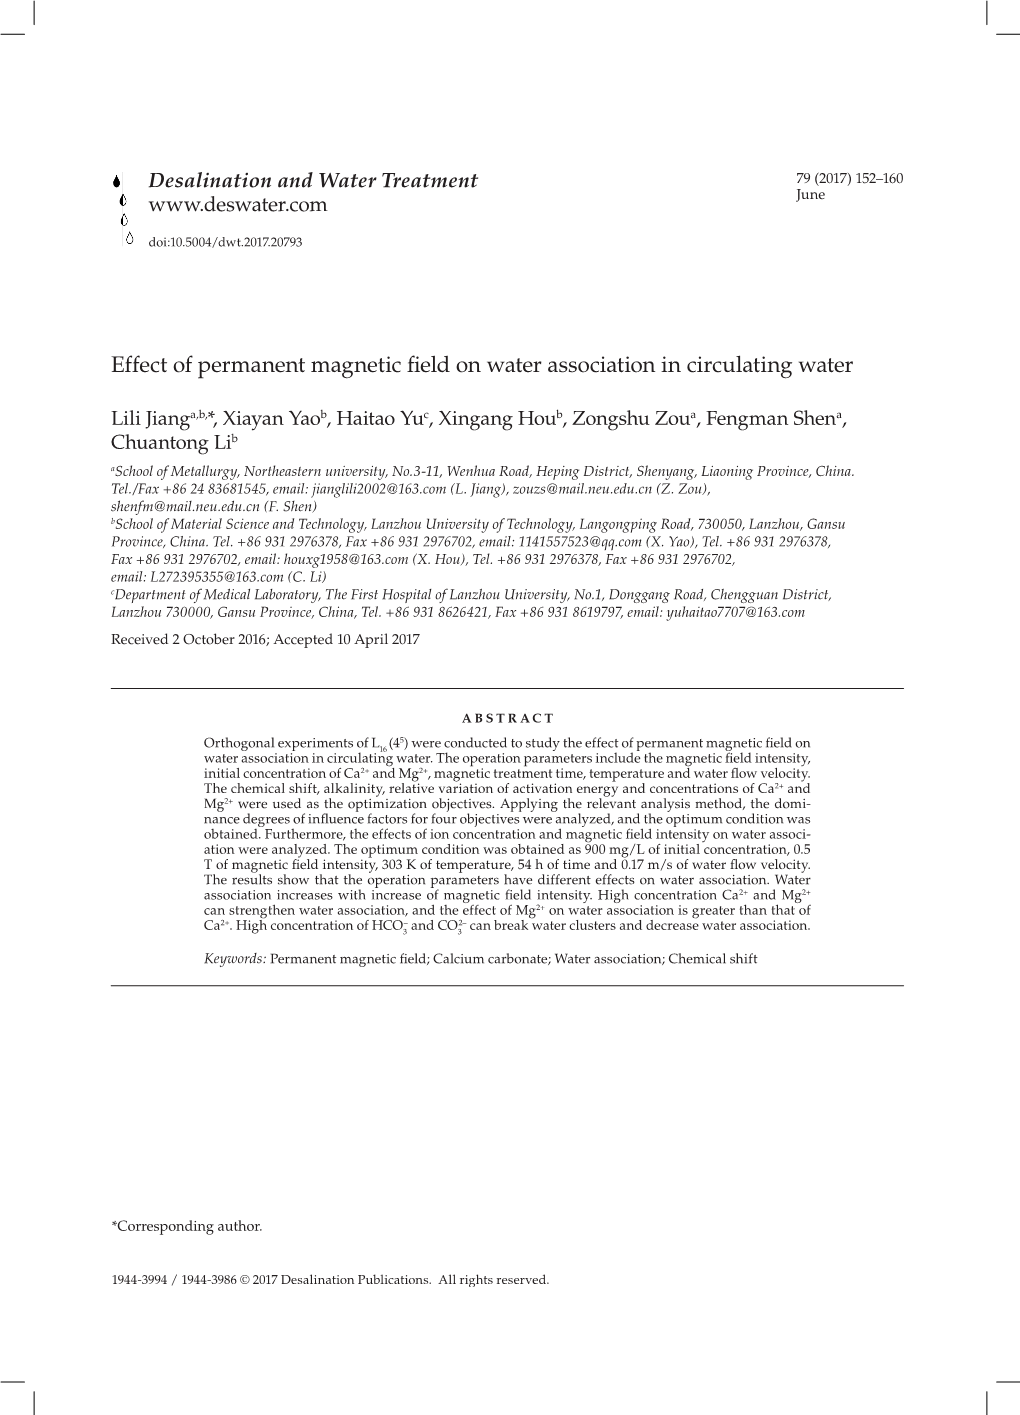 Effect of Permanent Magnetic Field on Water Association in Circulating Water